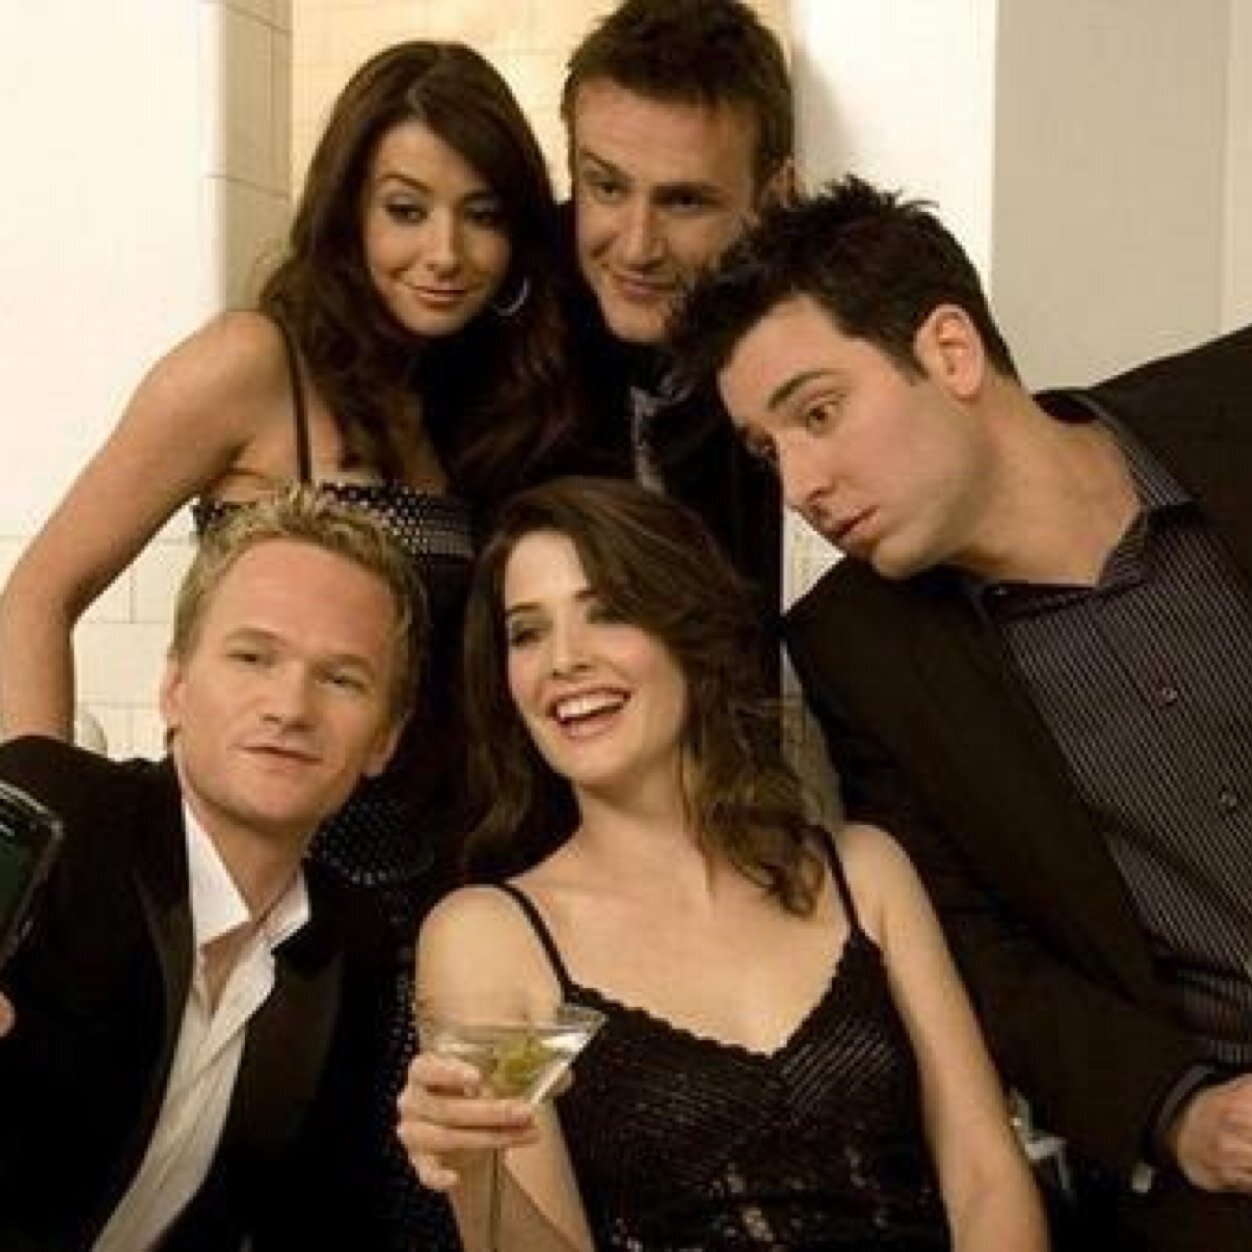 The best gifs from our favorite show How I Met Your Mother